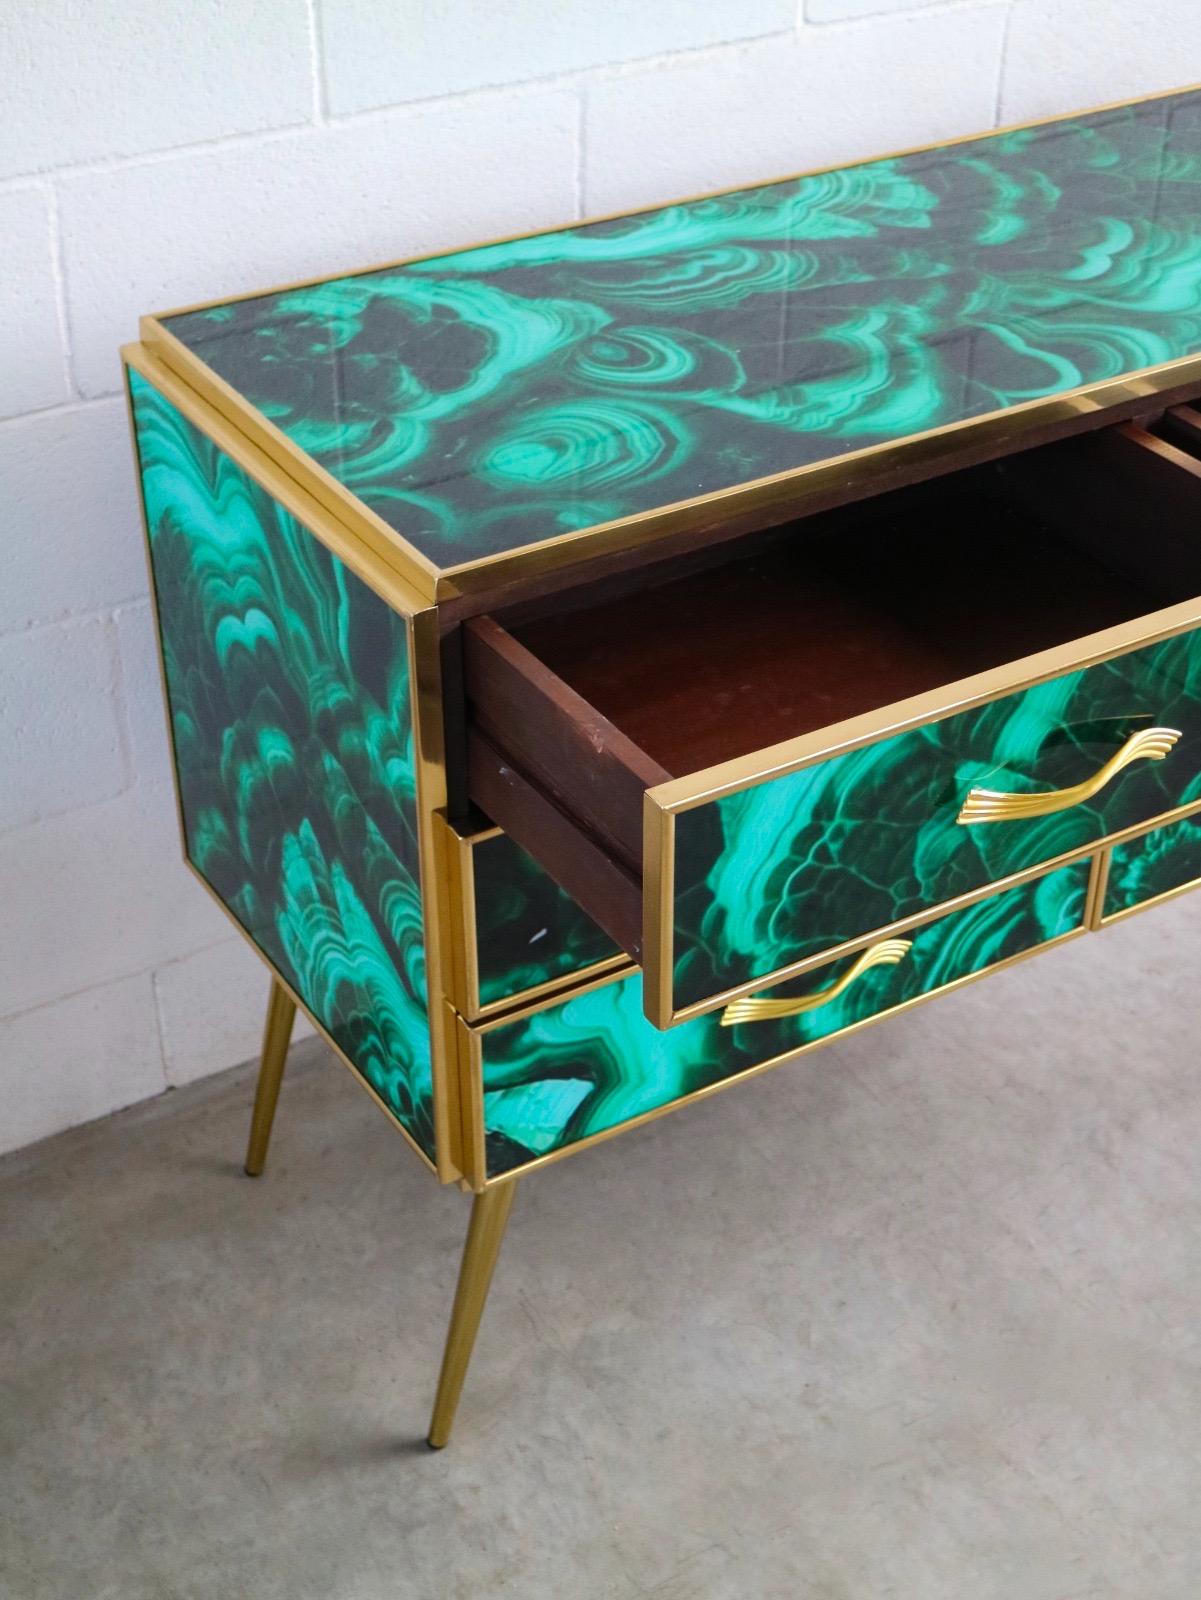 Midcentury Style Brass and Malachite Colored Murano Glass Commode, 2020 For Sale 4